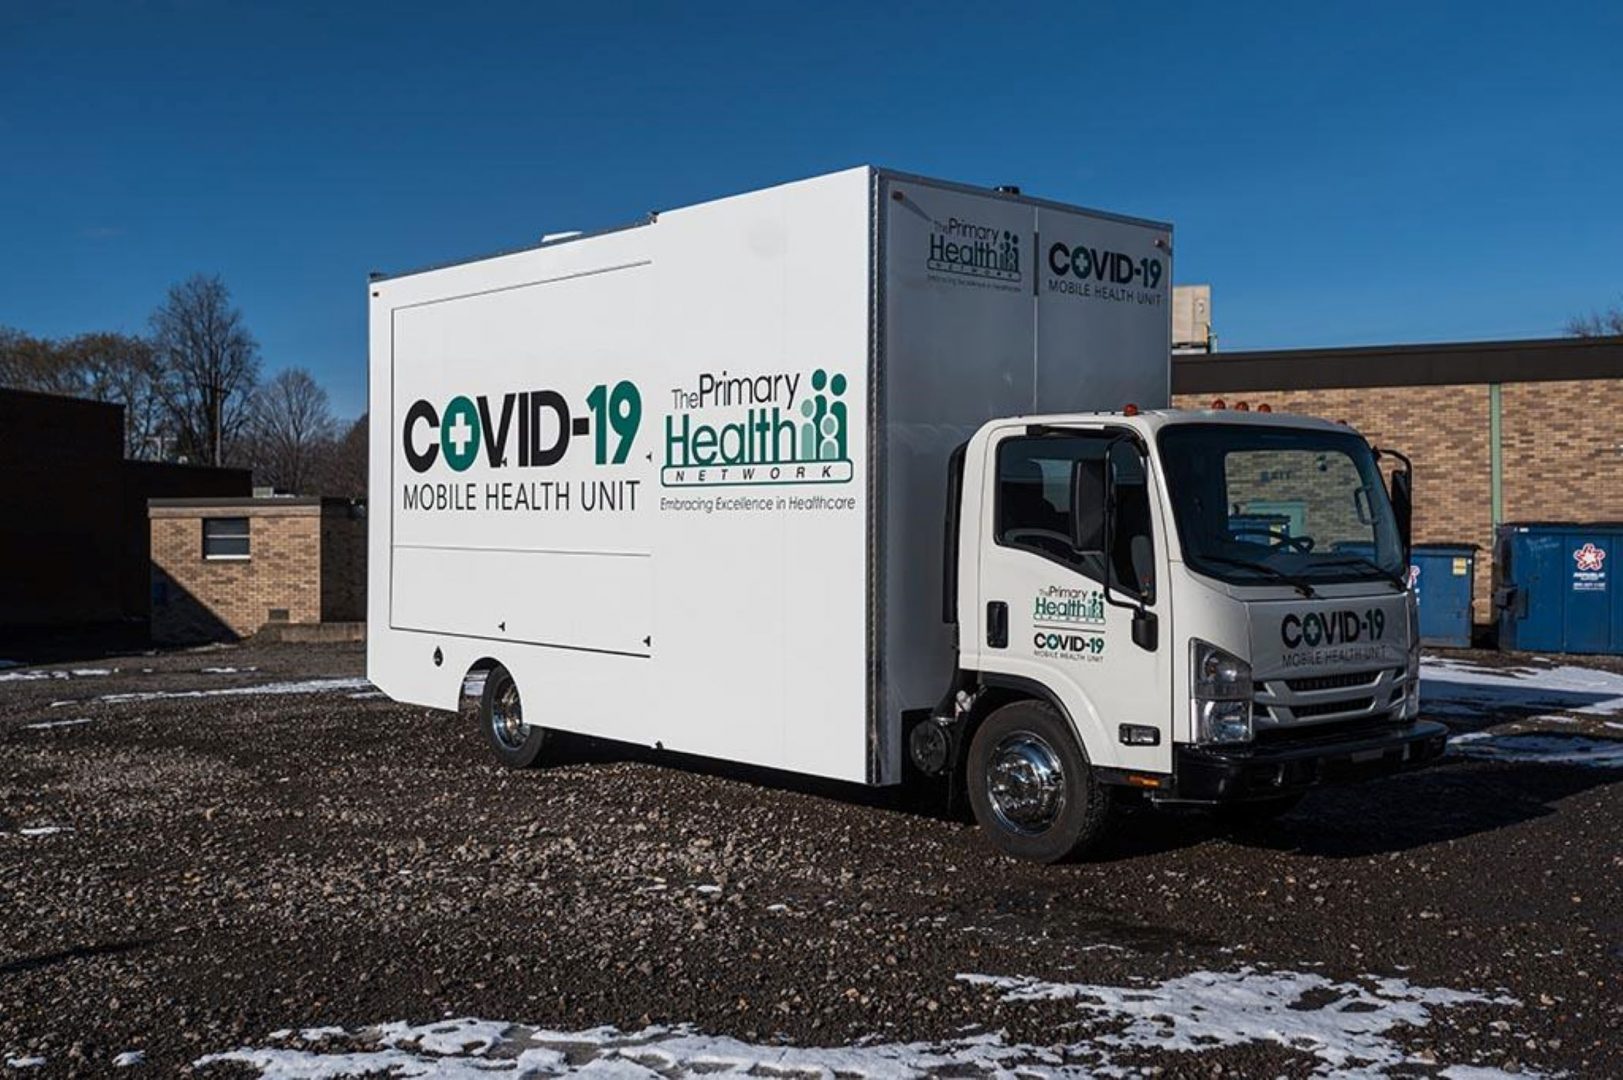 Rural healthcare providers told lawmakers during a public hearing on Jan. 13 that adapting vaccine delivery for rural communities, such as using mobile health trucks like the one pictured, is key.